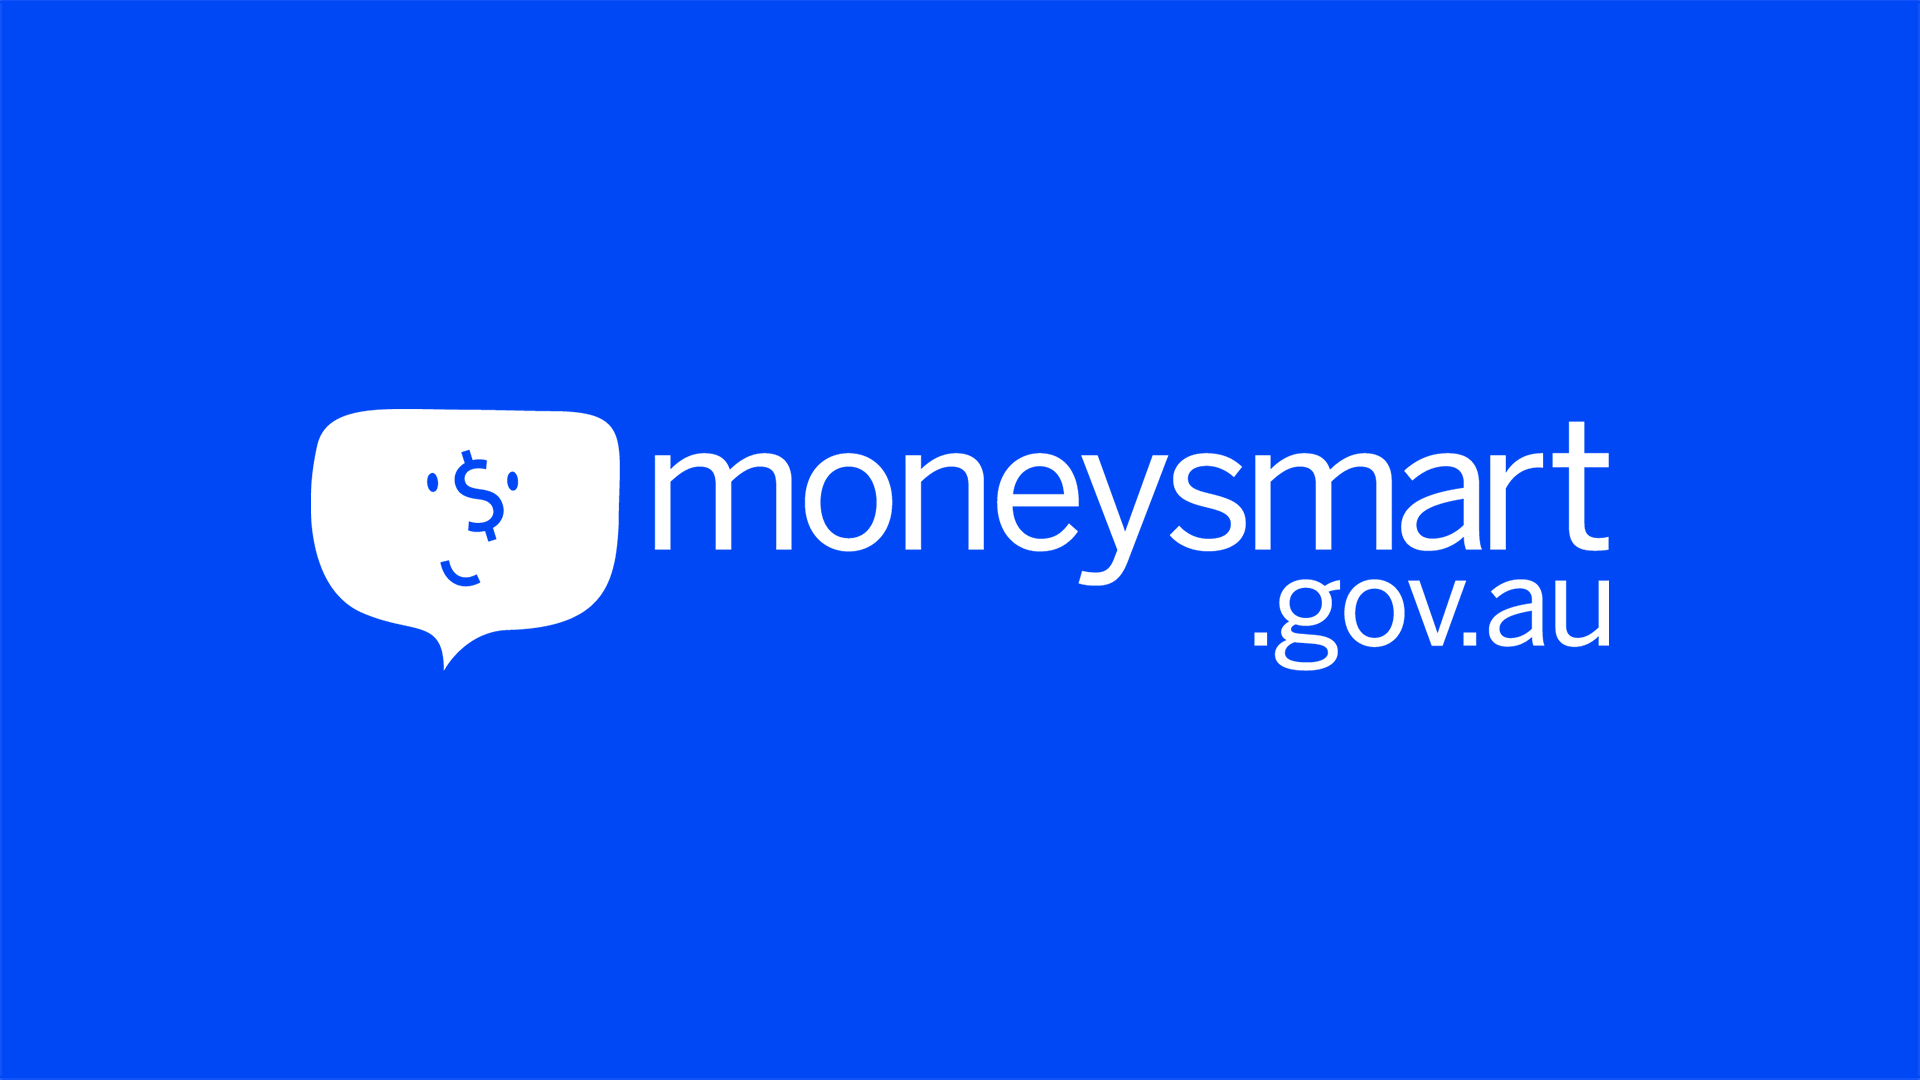 Companies you should not deal with - Moneysmart.gov.au